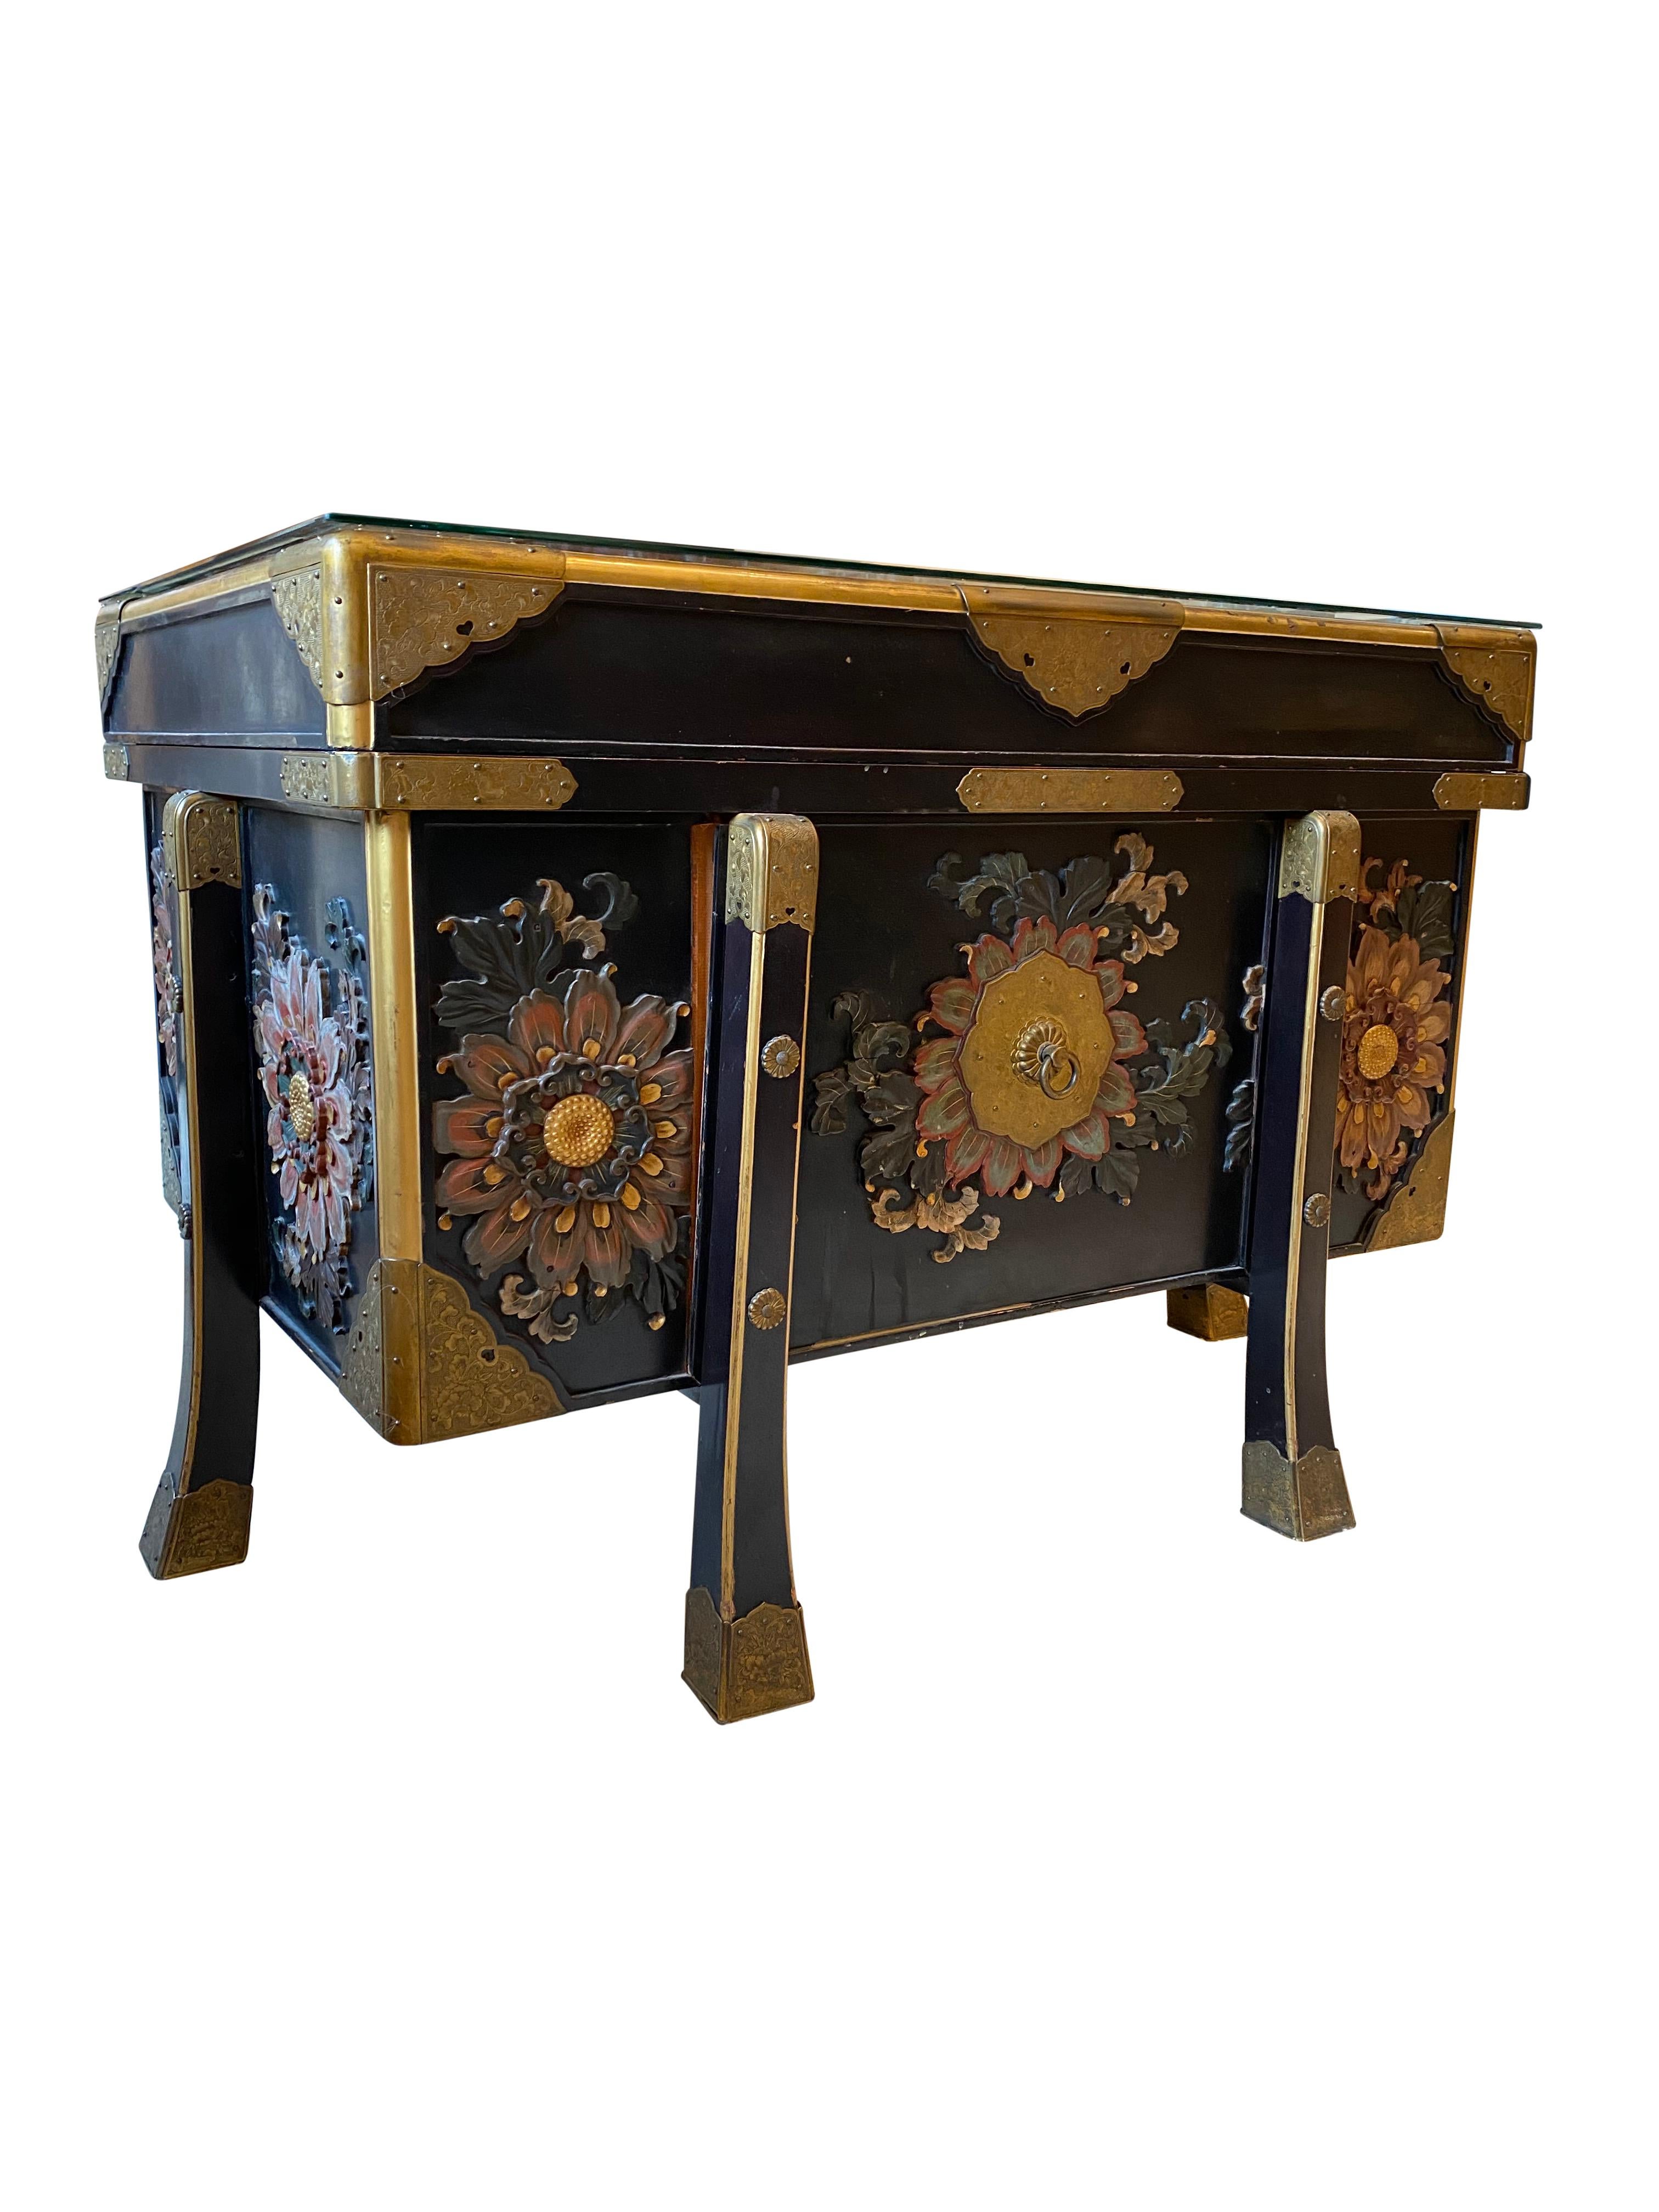 An absolutely stunning large Japanese black lacquered storage chest, 19th century. This chest is offered with superb hand carved wooden plum and cherry blossom flowers, and spectacular floral mounts. Positive meanings of flowers in China are Orchids